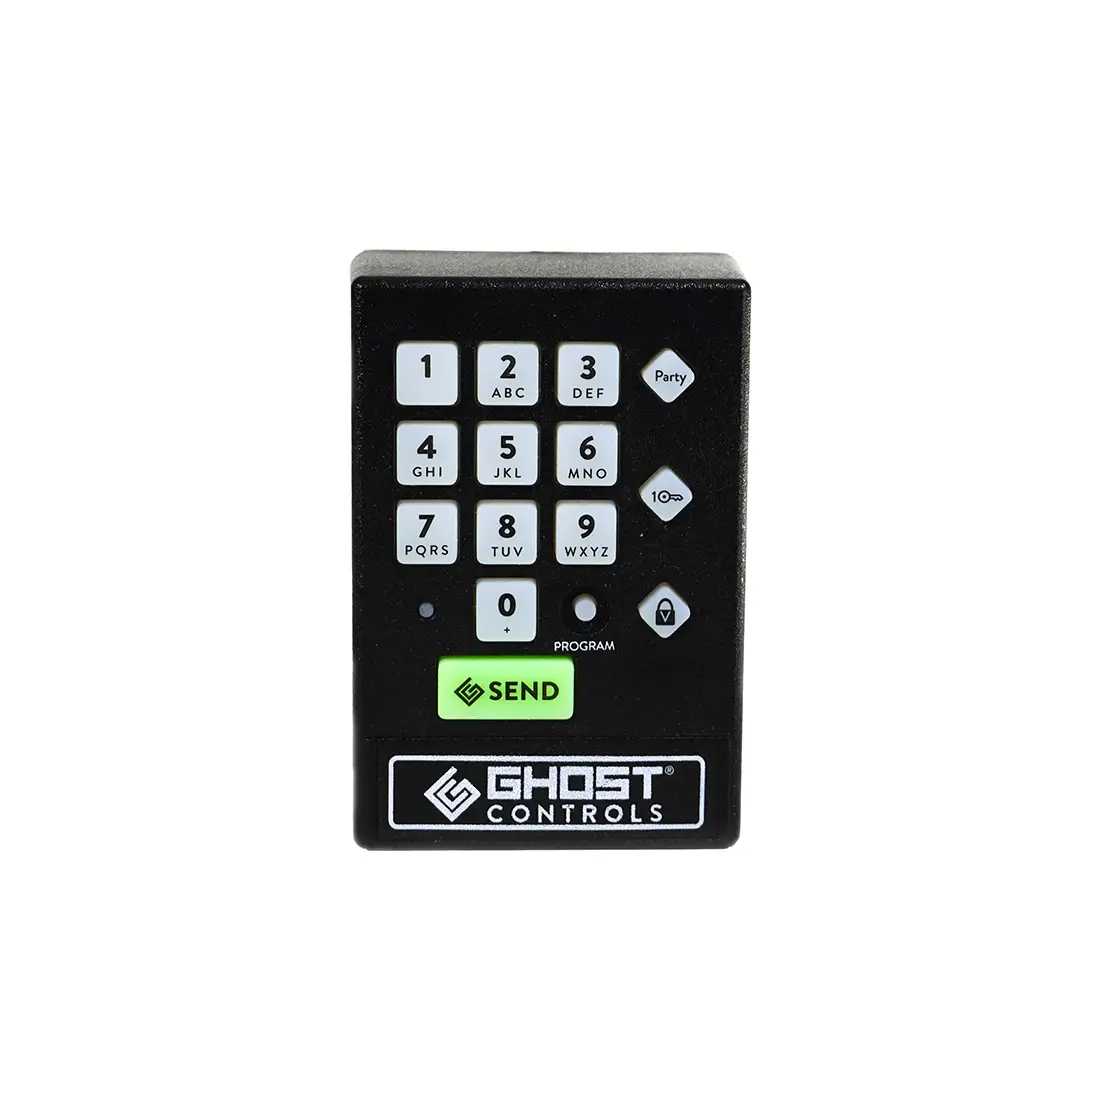 Can two keypads be used on one gate? One inside and one outside?